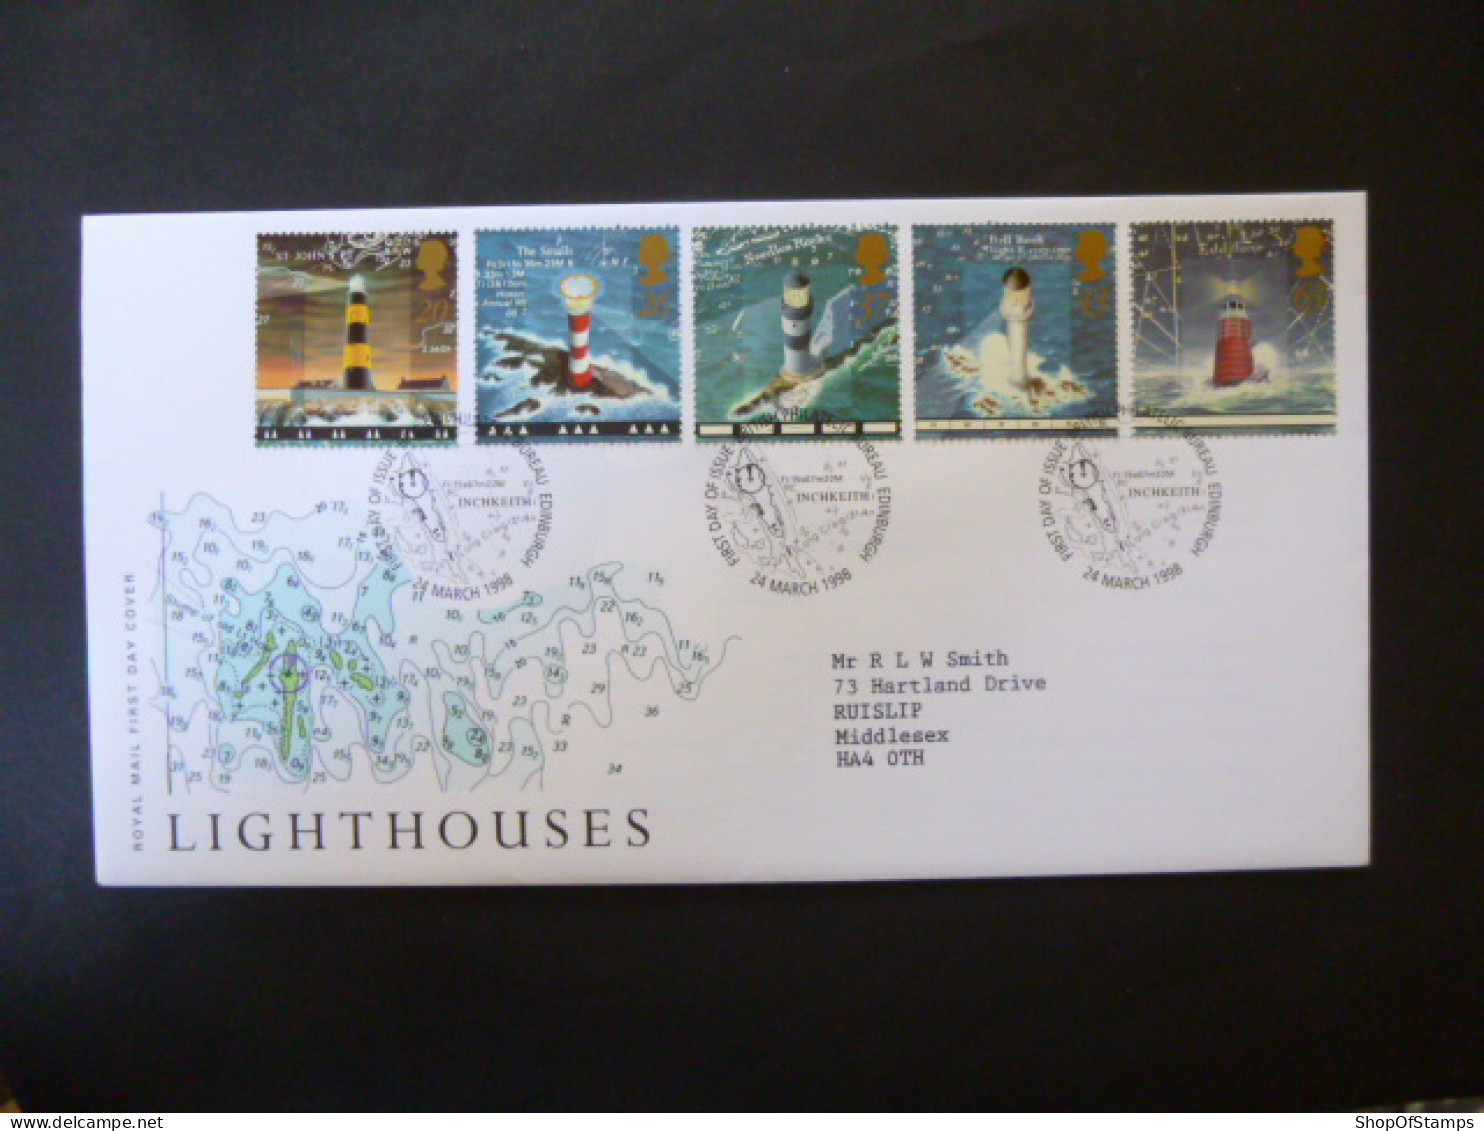 GREAT BRITAIN SG 2034-38 LIGHTHOUSES FDC EDINBURGH - Unclassified